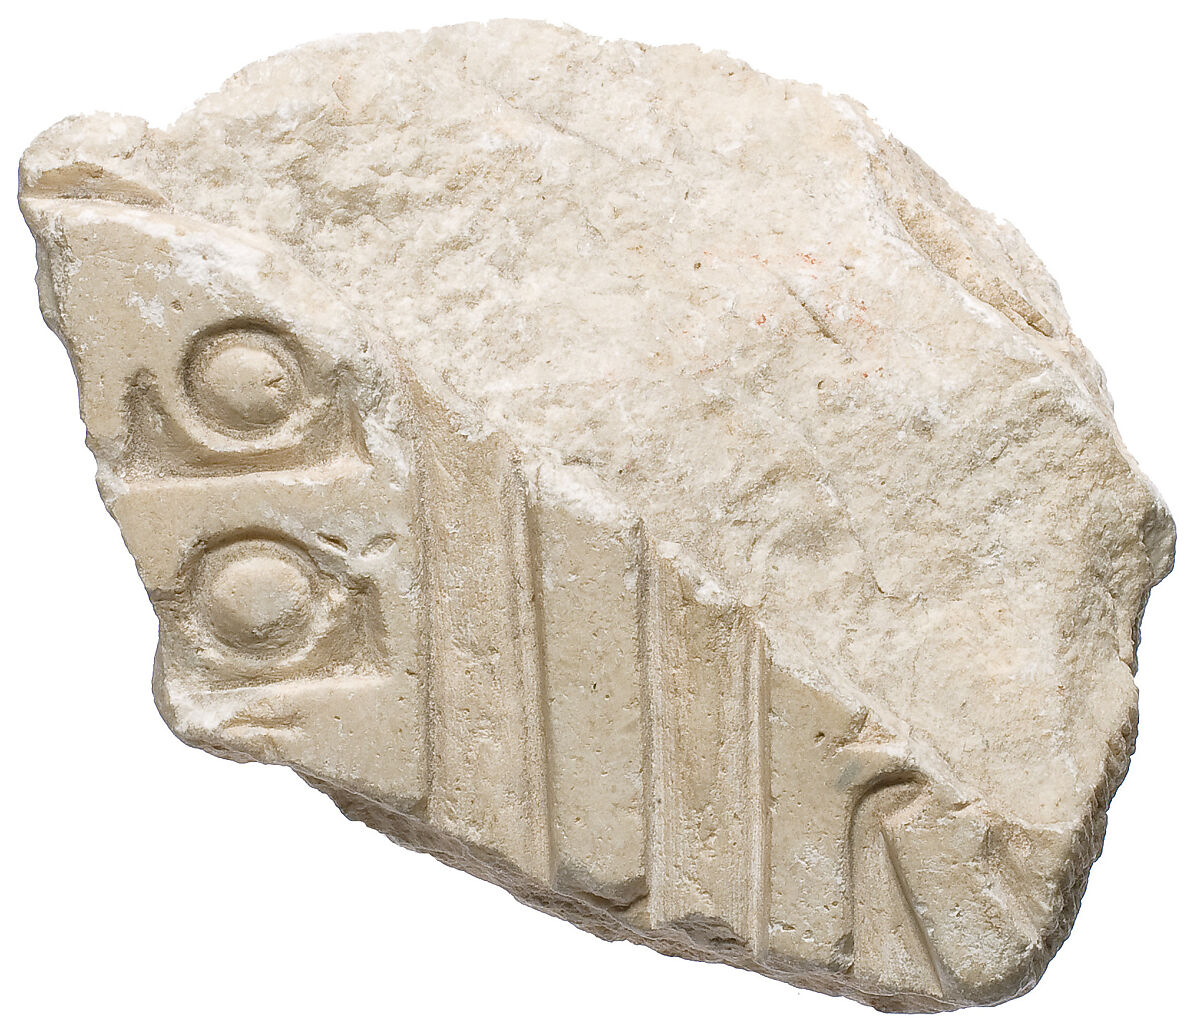 Inscribed fragment, Aten cartouches, Indurated limestone 